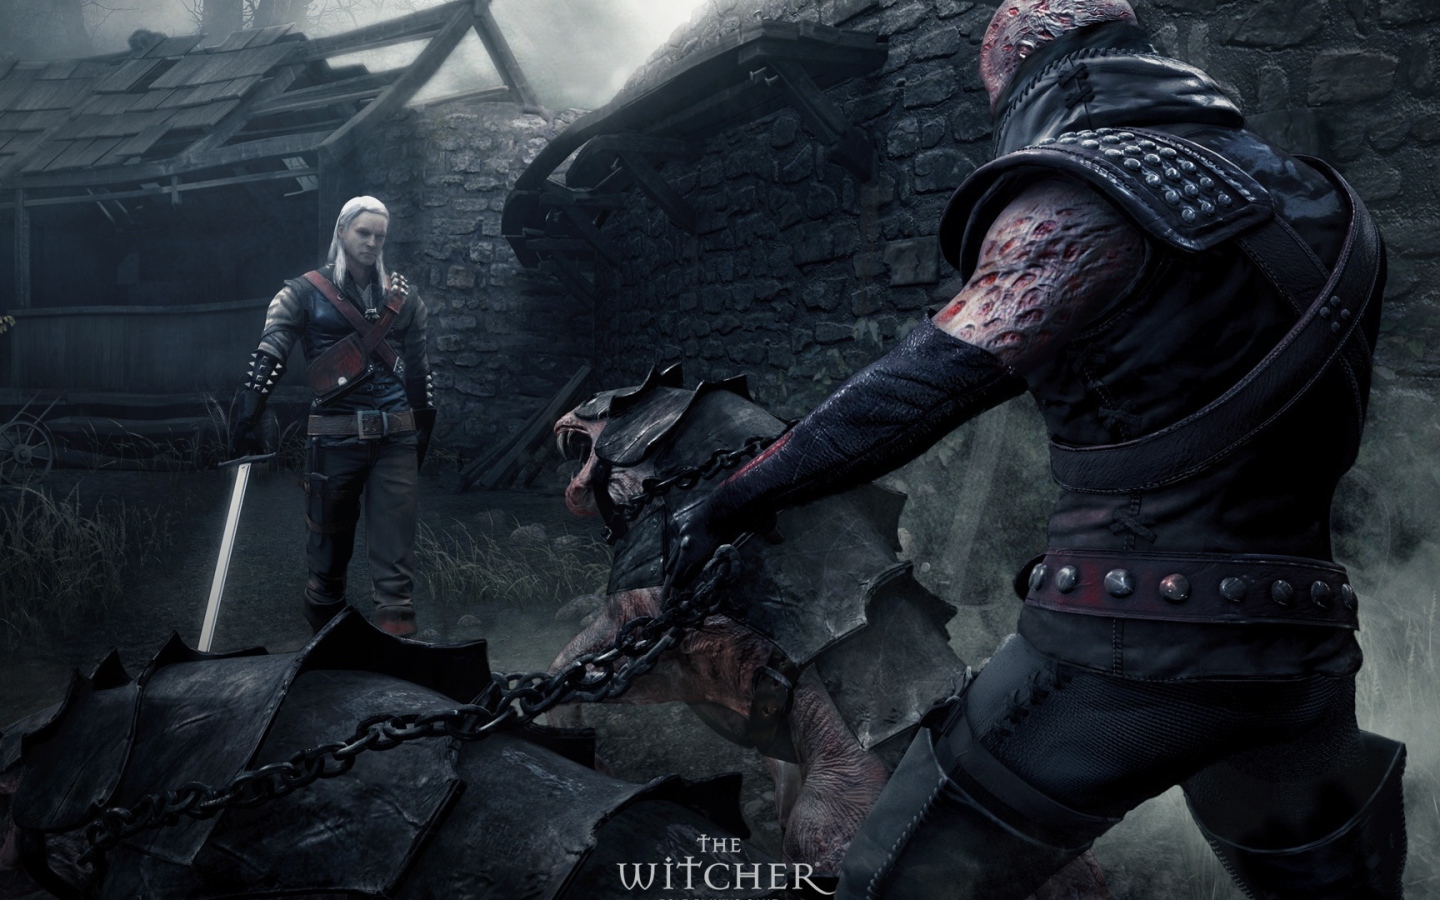 Wild beasts of the Witcher